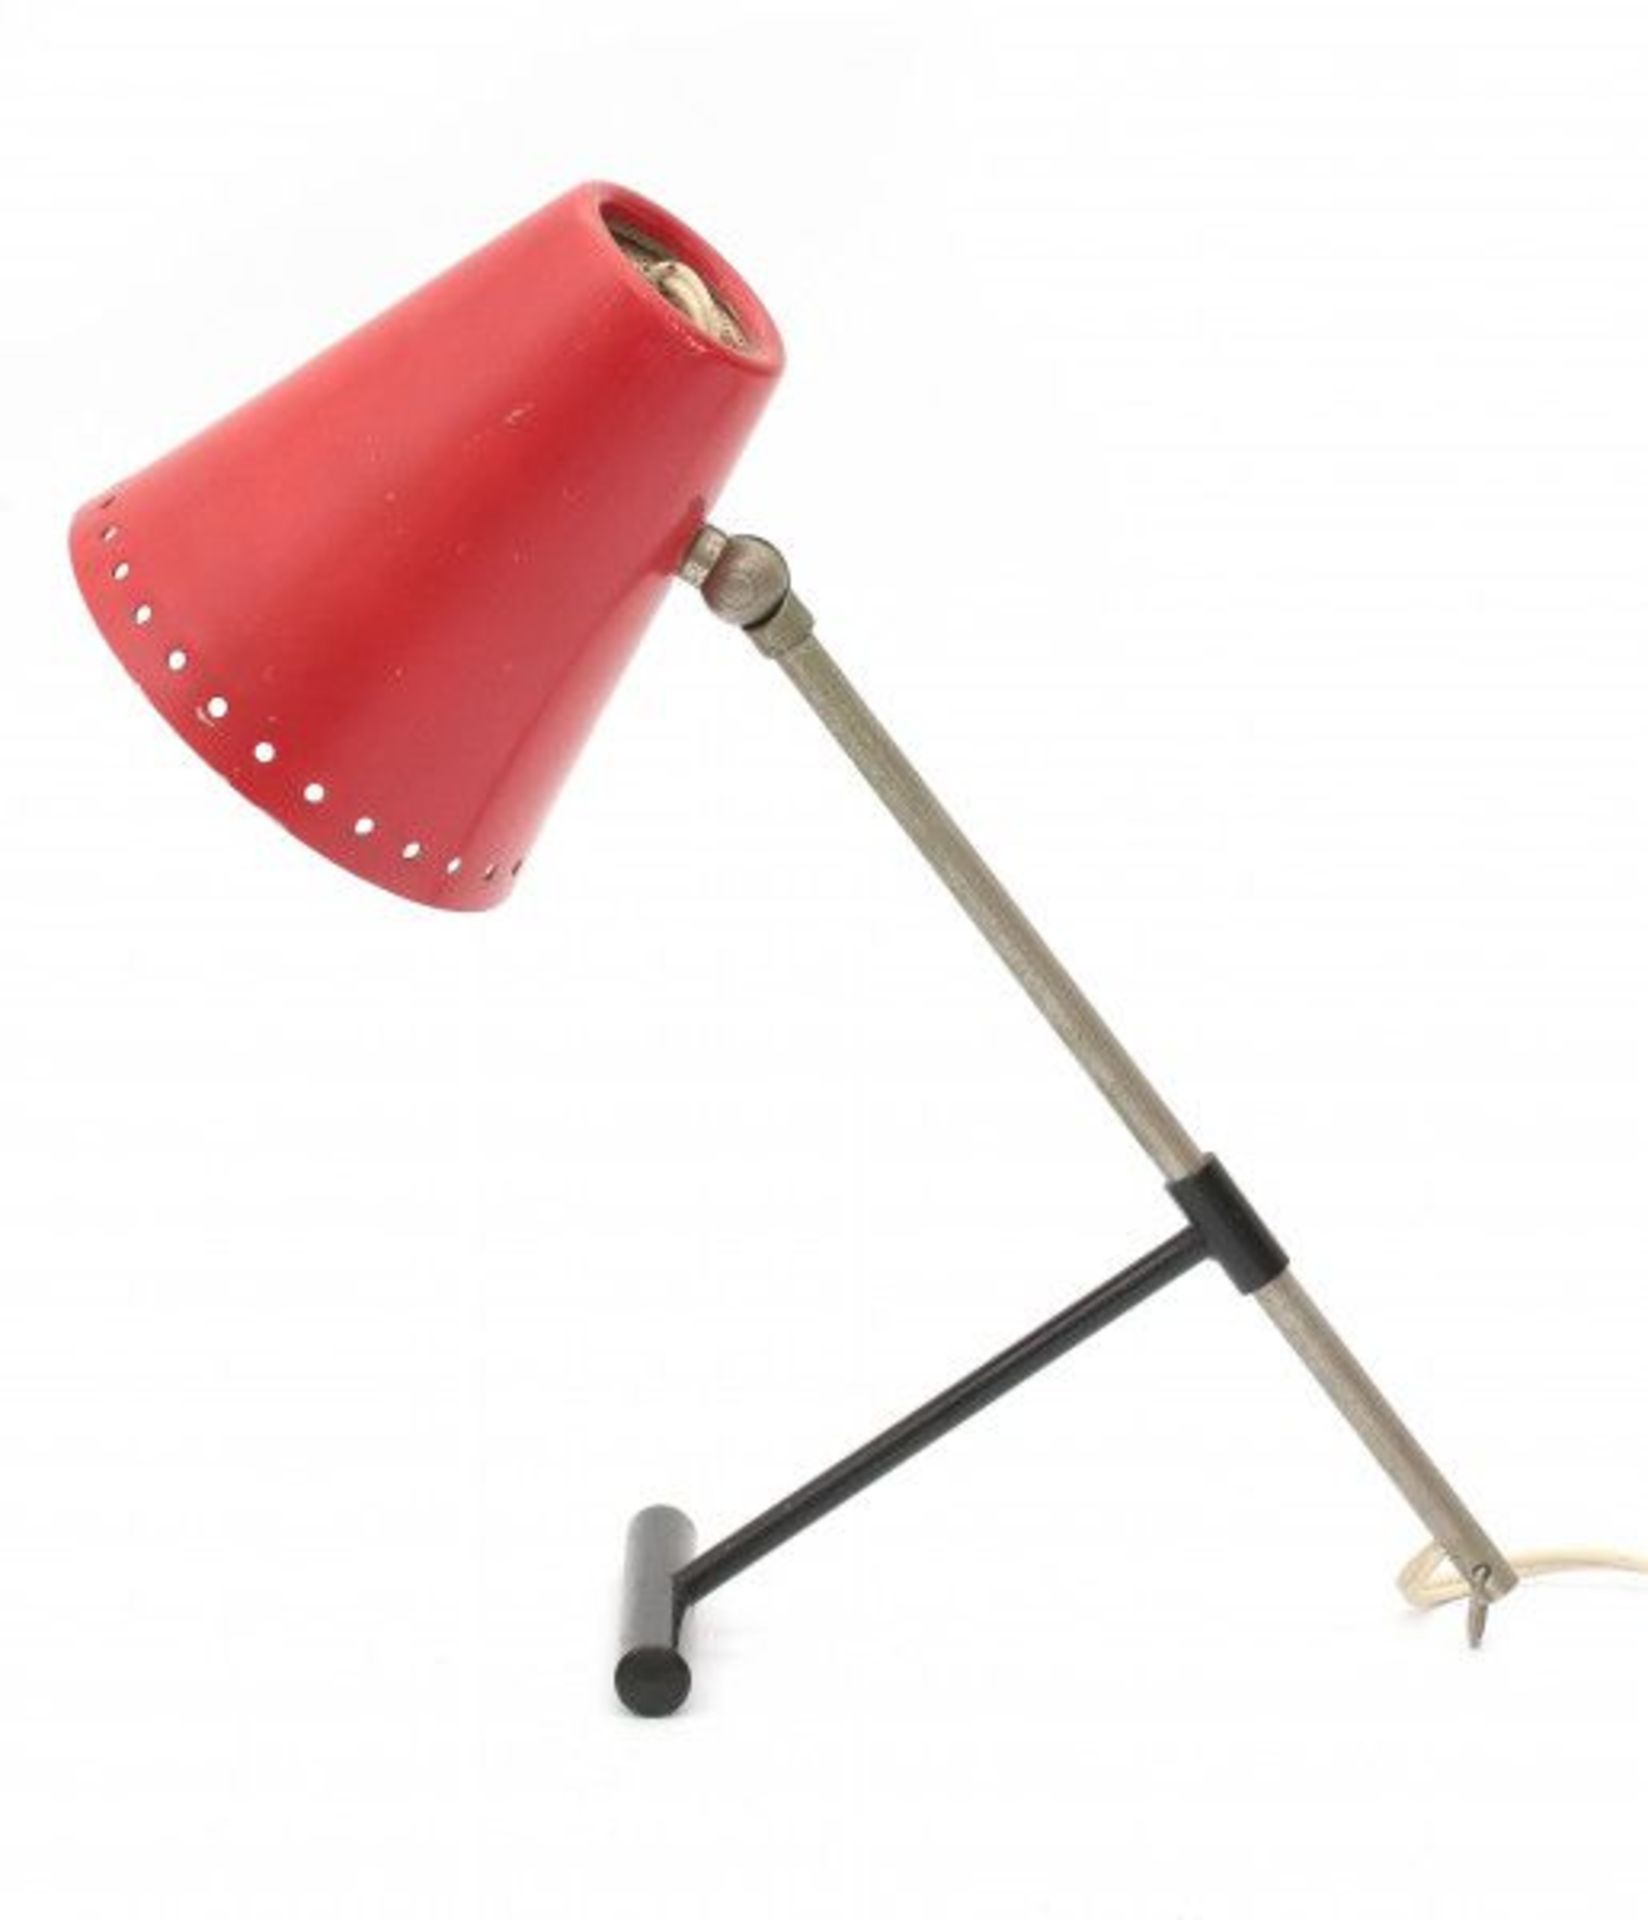 Floris FiedeldijA nickle-plated, black and red lacquered metal desklamp, adjustable in height,